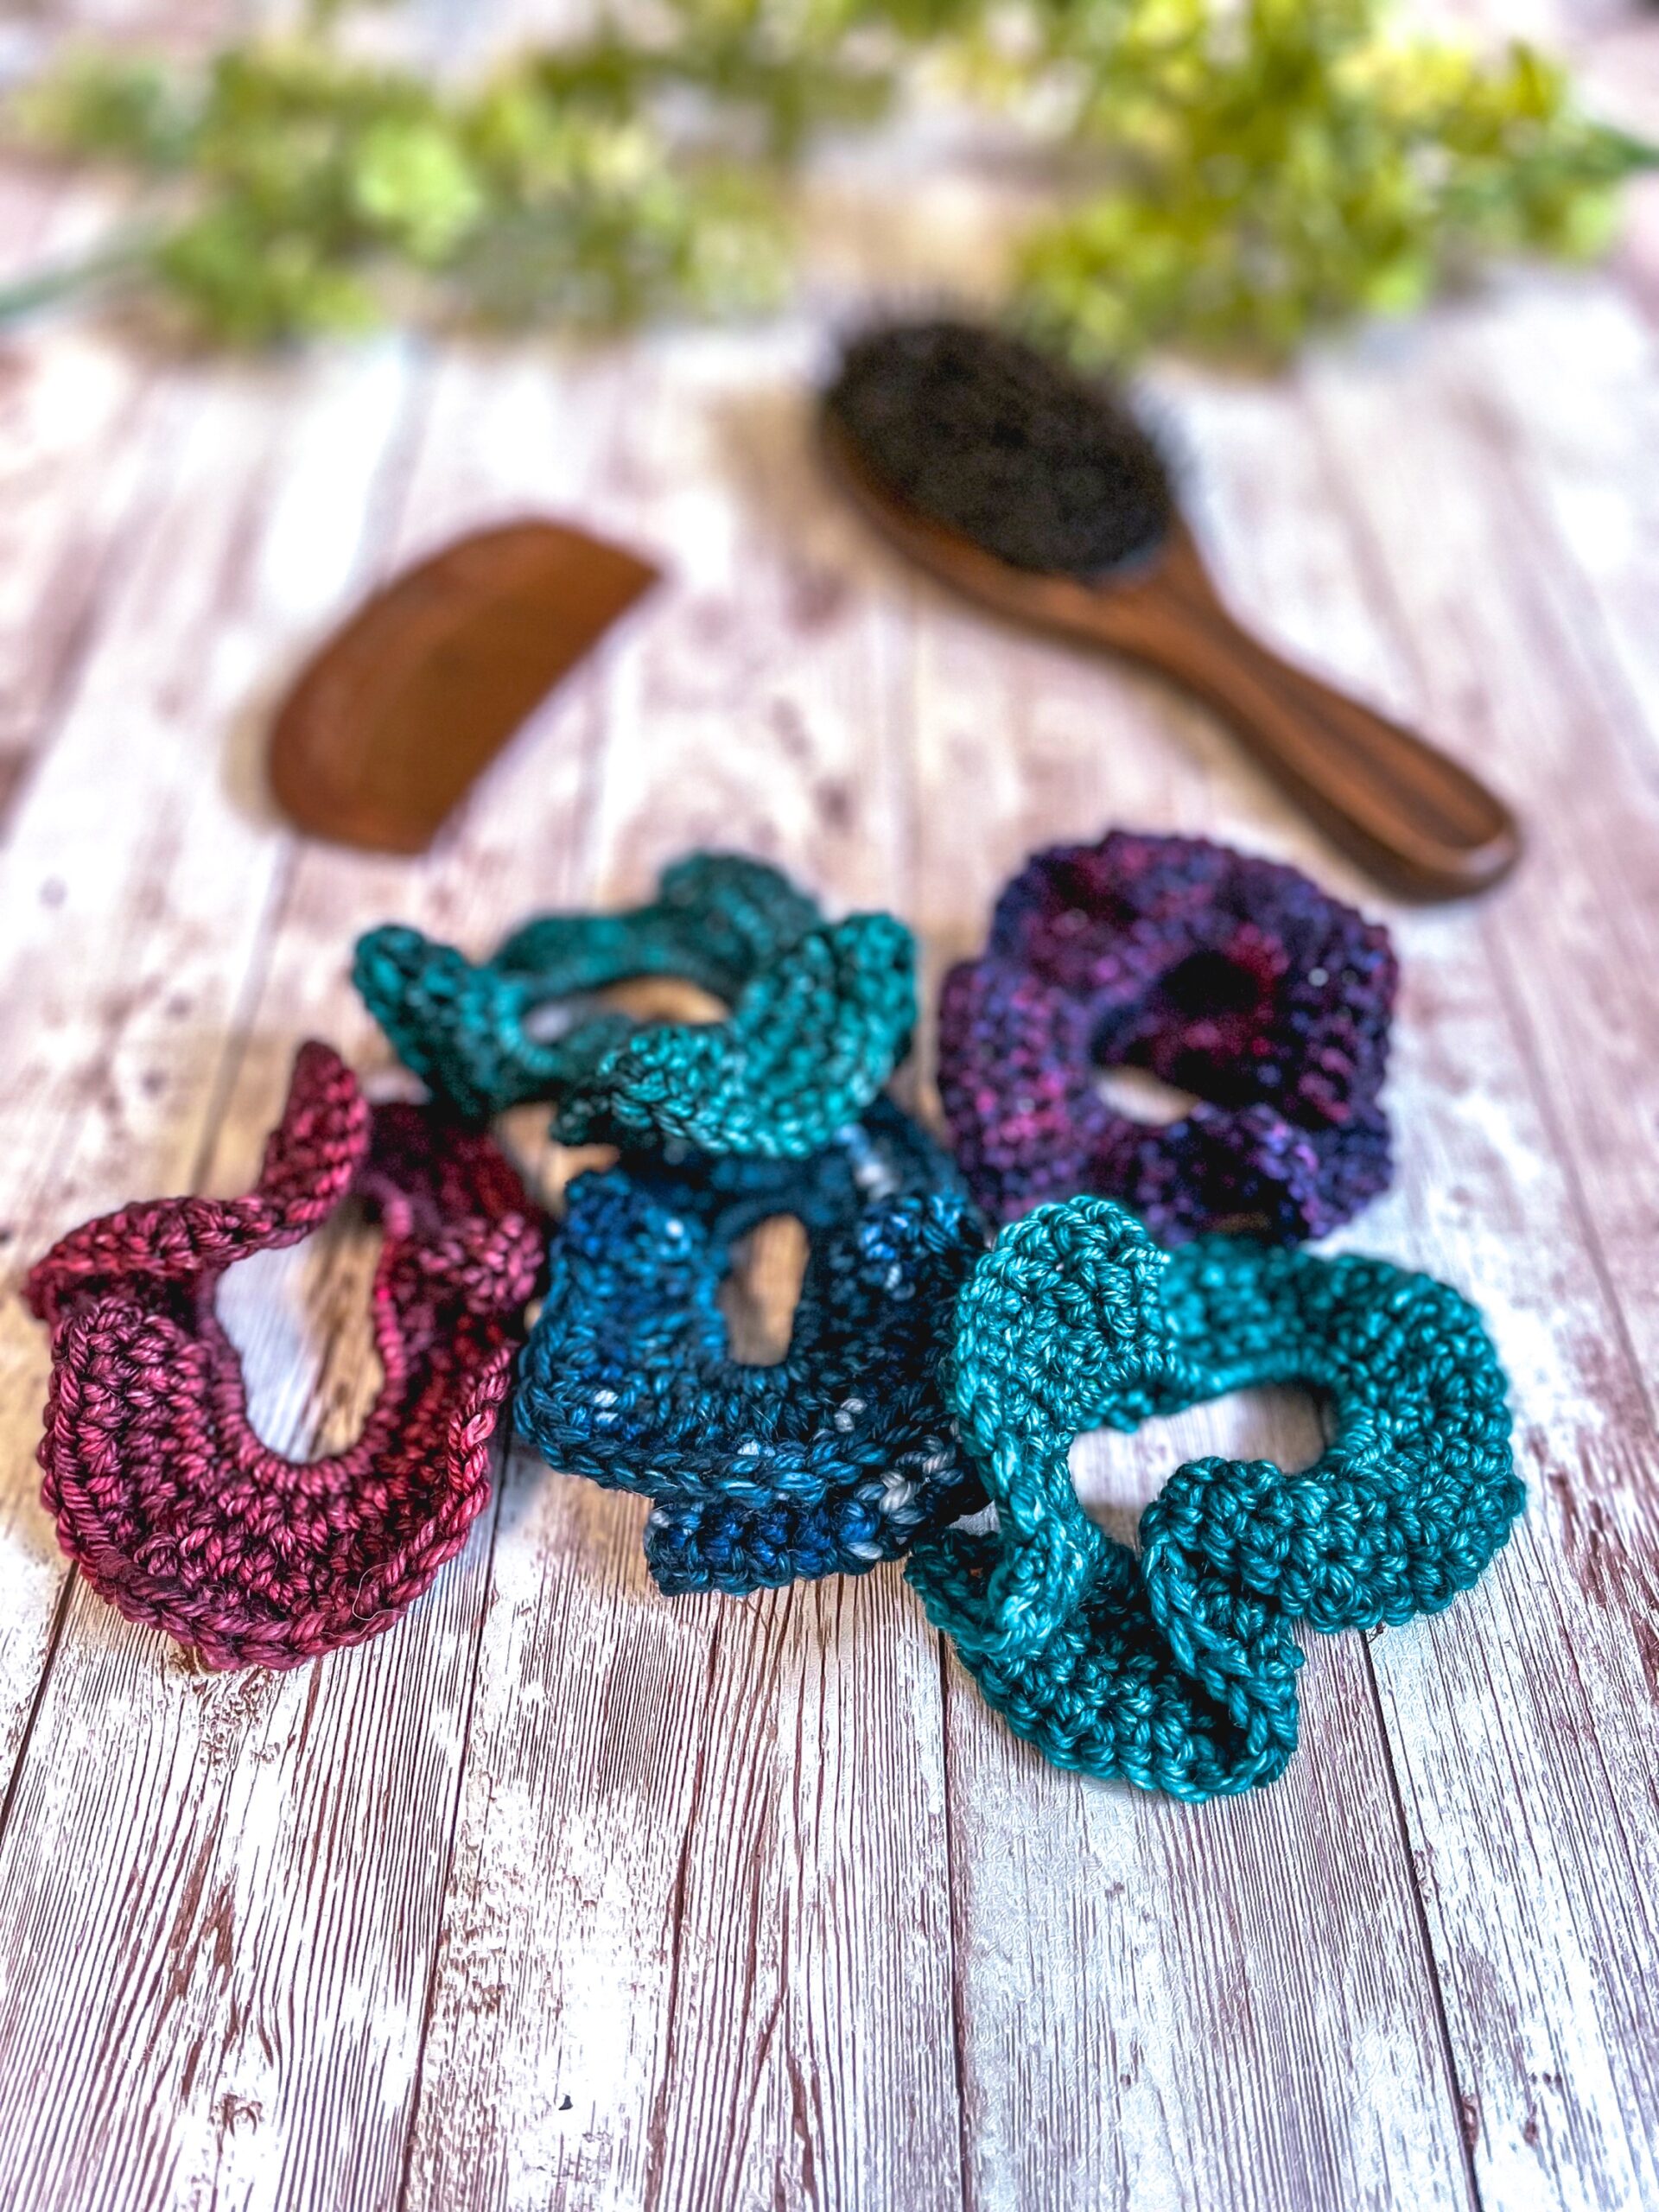 A set of 5 ruffled hair bands made with hand-dyed merino rests on a wood plank with a wood brush, wood comb, and greenery in the background. The earthy toned colors include a green, teal, purple, blue, and red